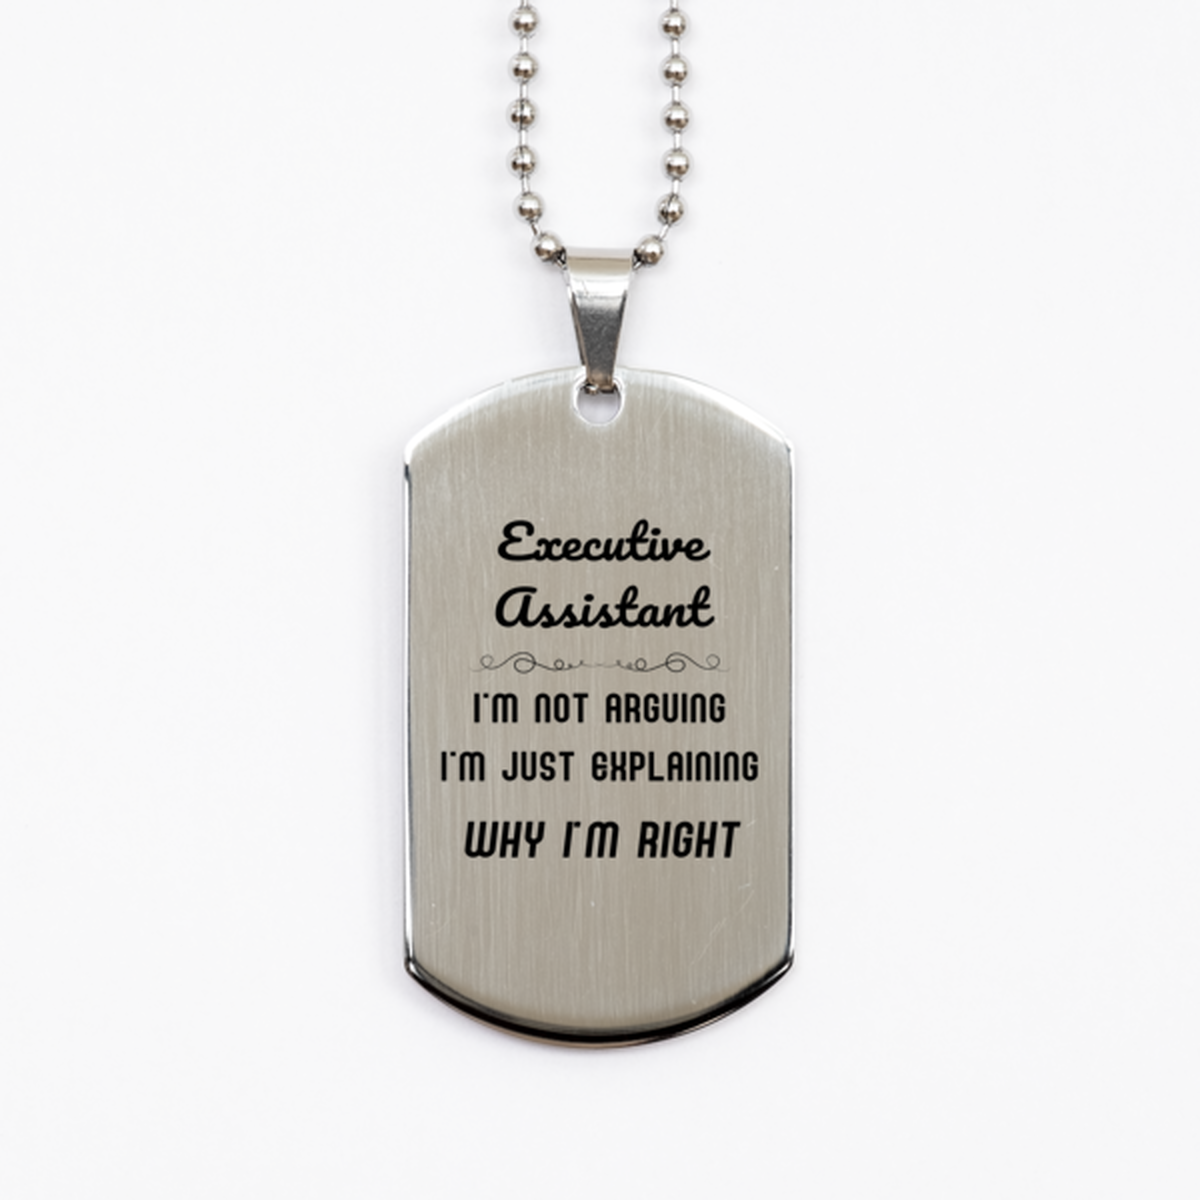 Executive Assistant I'm not Arguing. I'm Just Explaining Why I'm RIGHT Silver Dog Tag, Funny Saying Quote Executive Assistant Gifts For Executive Assistant Graduation Birthday Christmas Gifts for Men Women Coworker